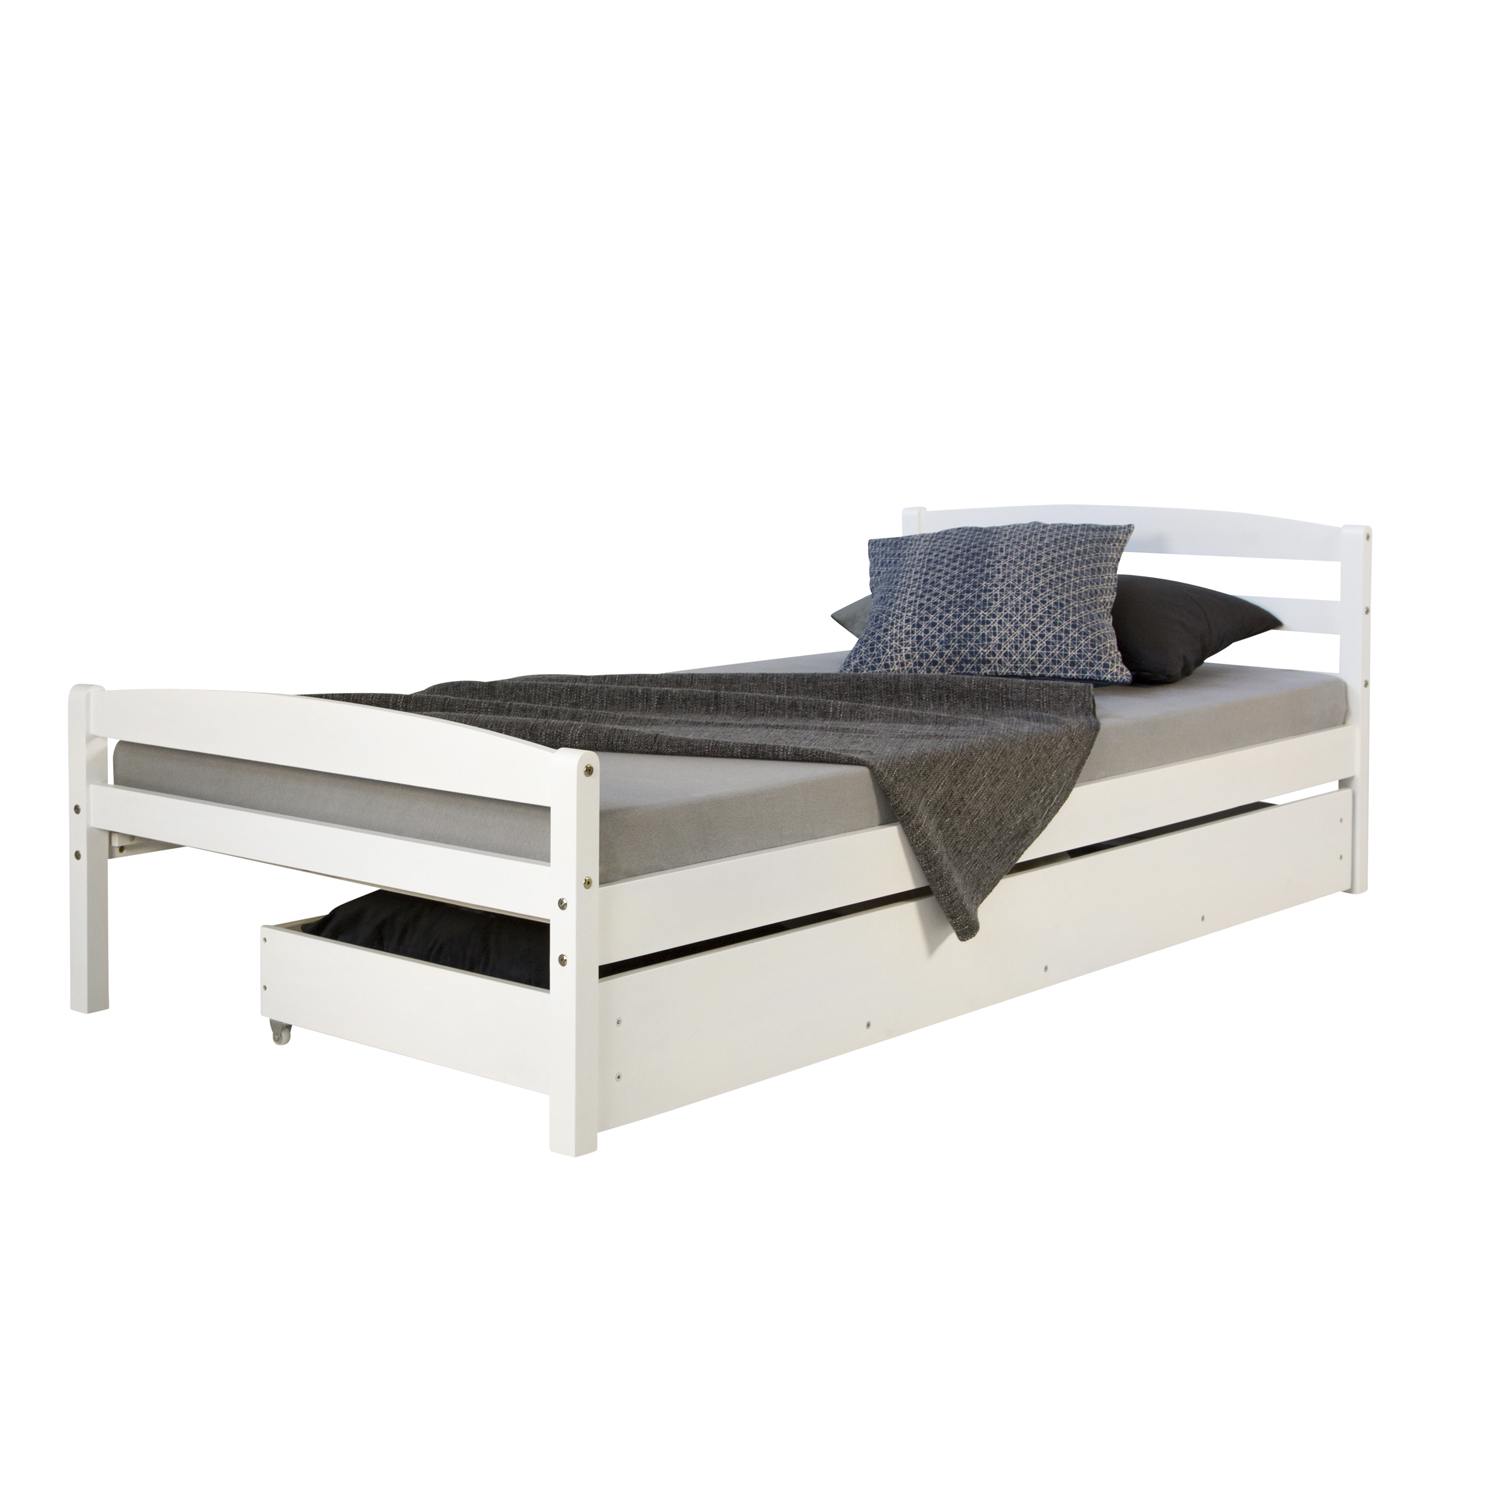 Wooden Bed 90x200 cm with drawer Youth Bed Single Bed Frame White